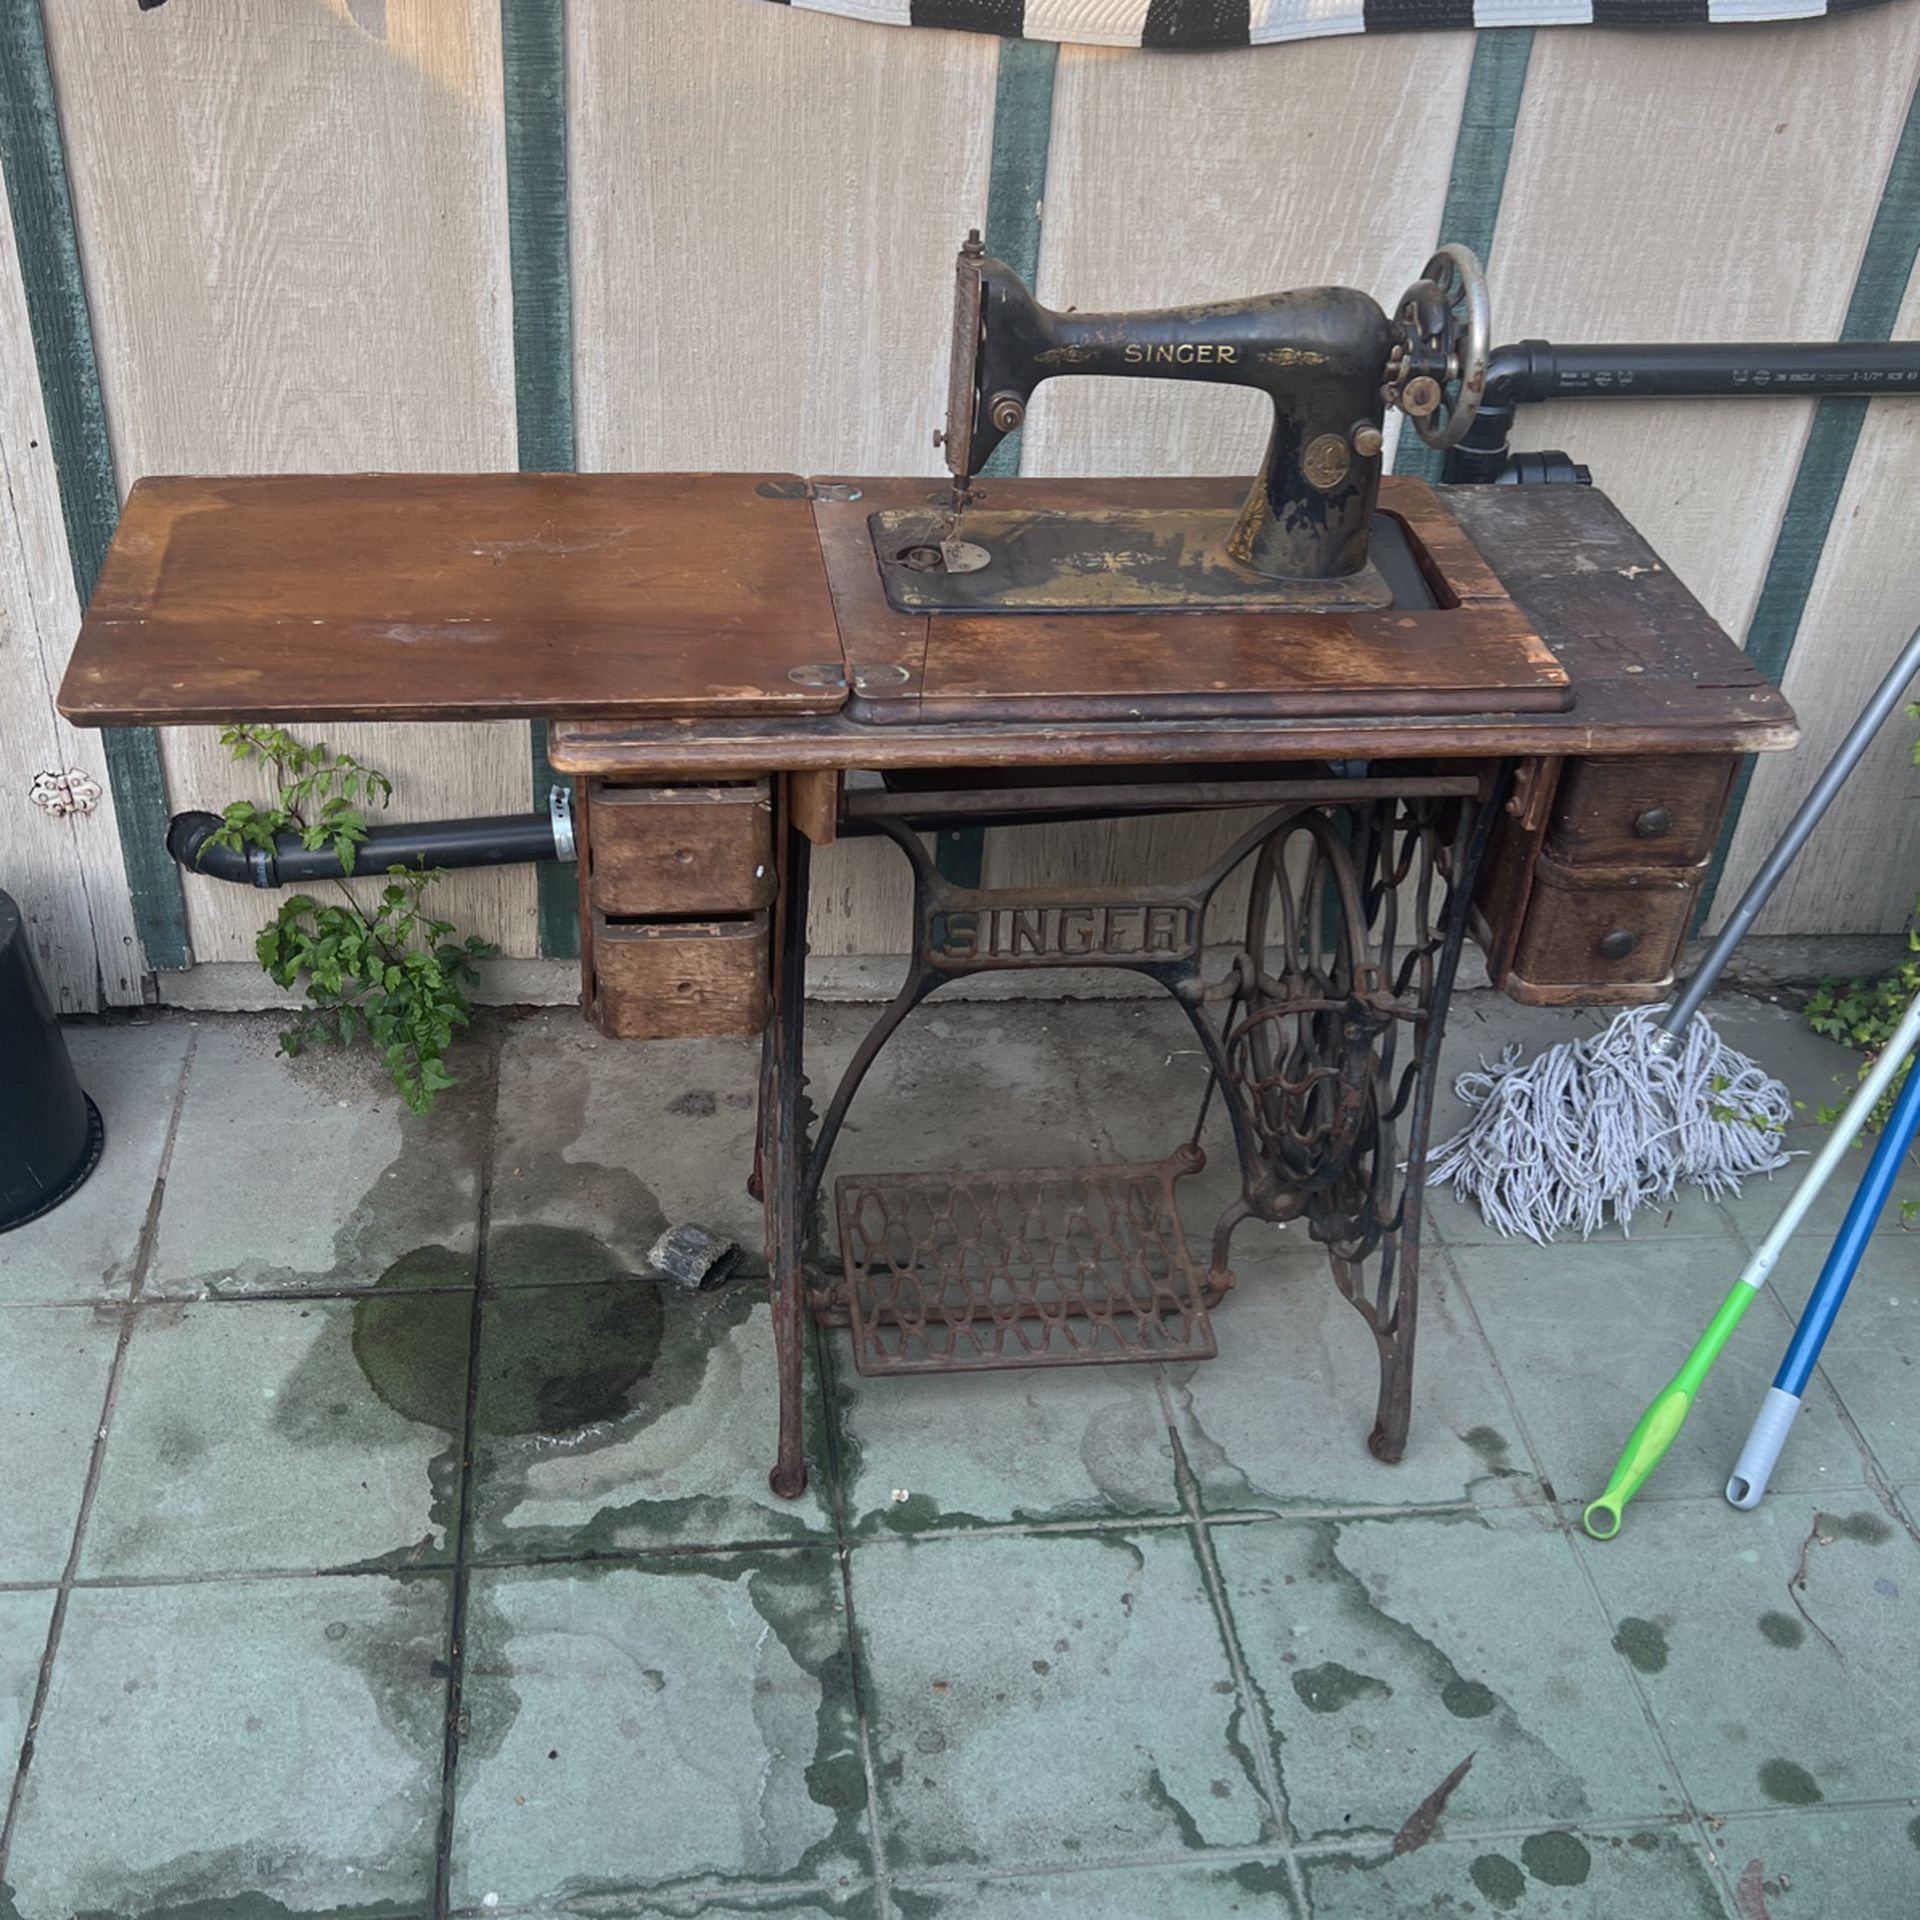 Used Singer Sewing Machine Early 1900s